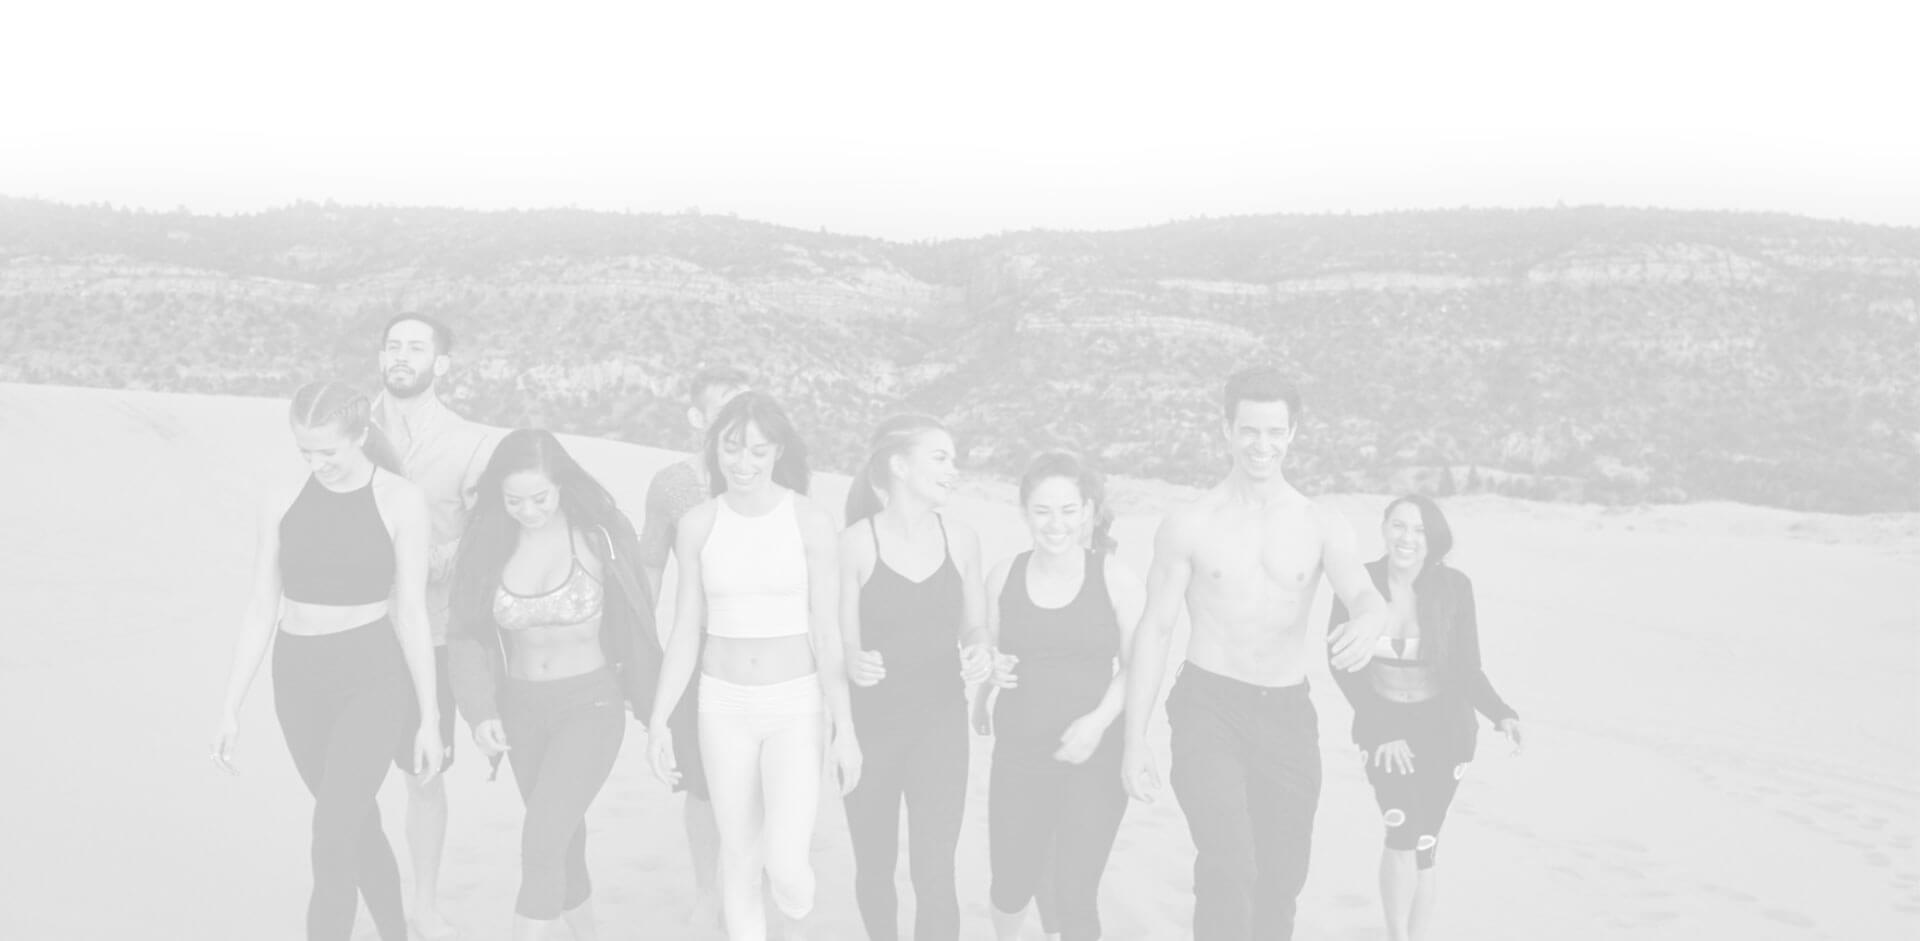 Background image of fit and healthy people after working out